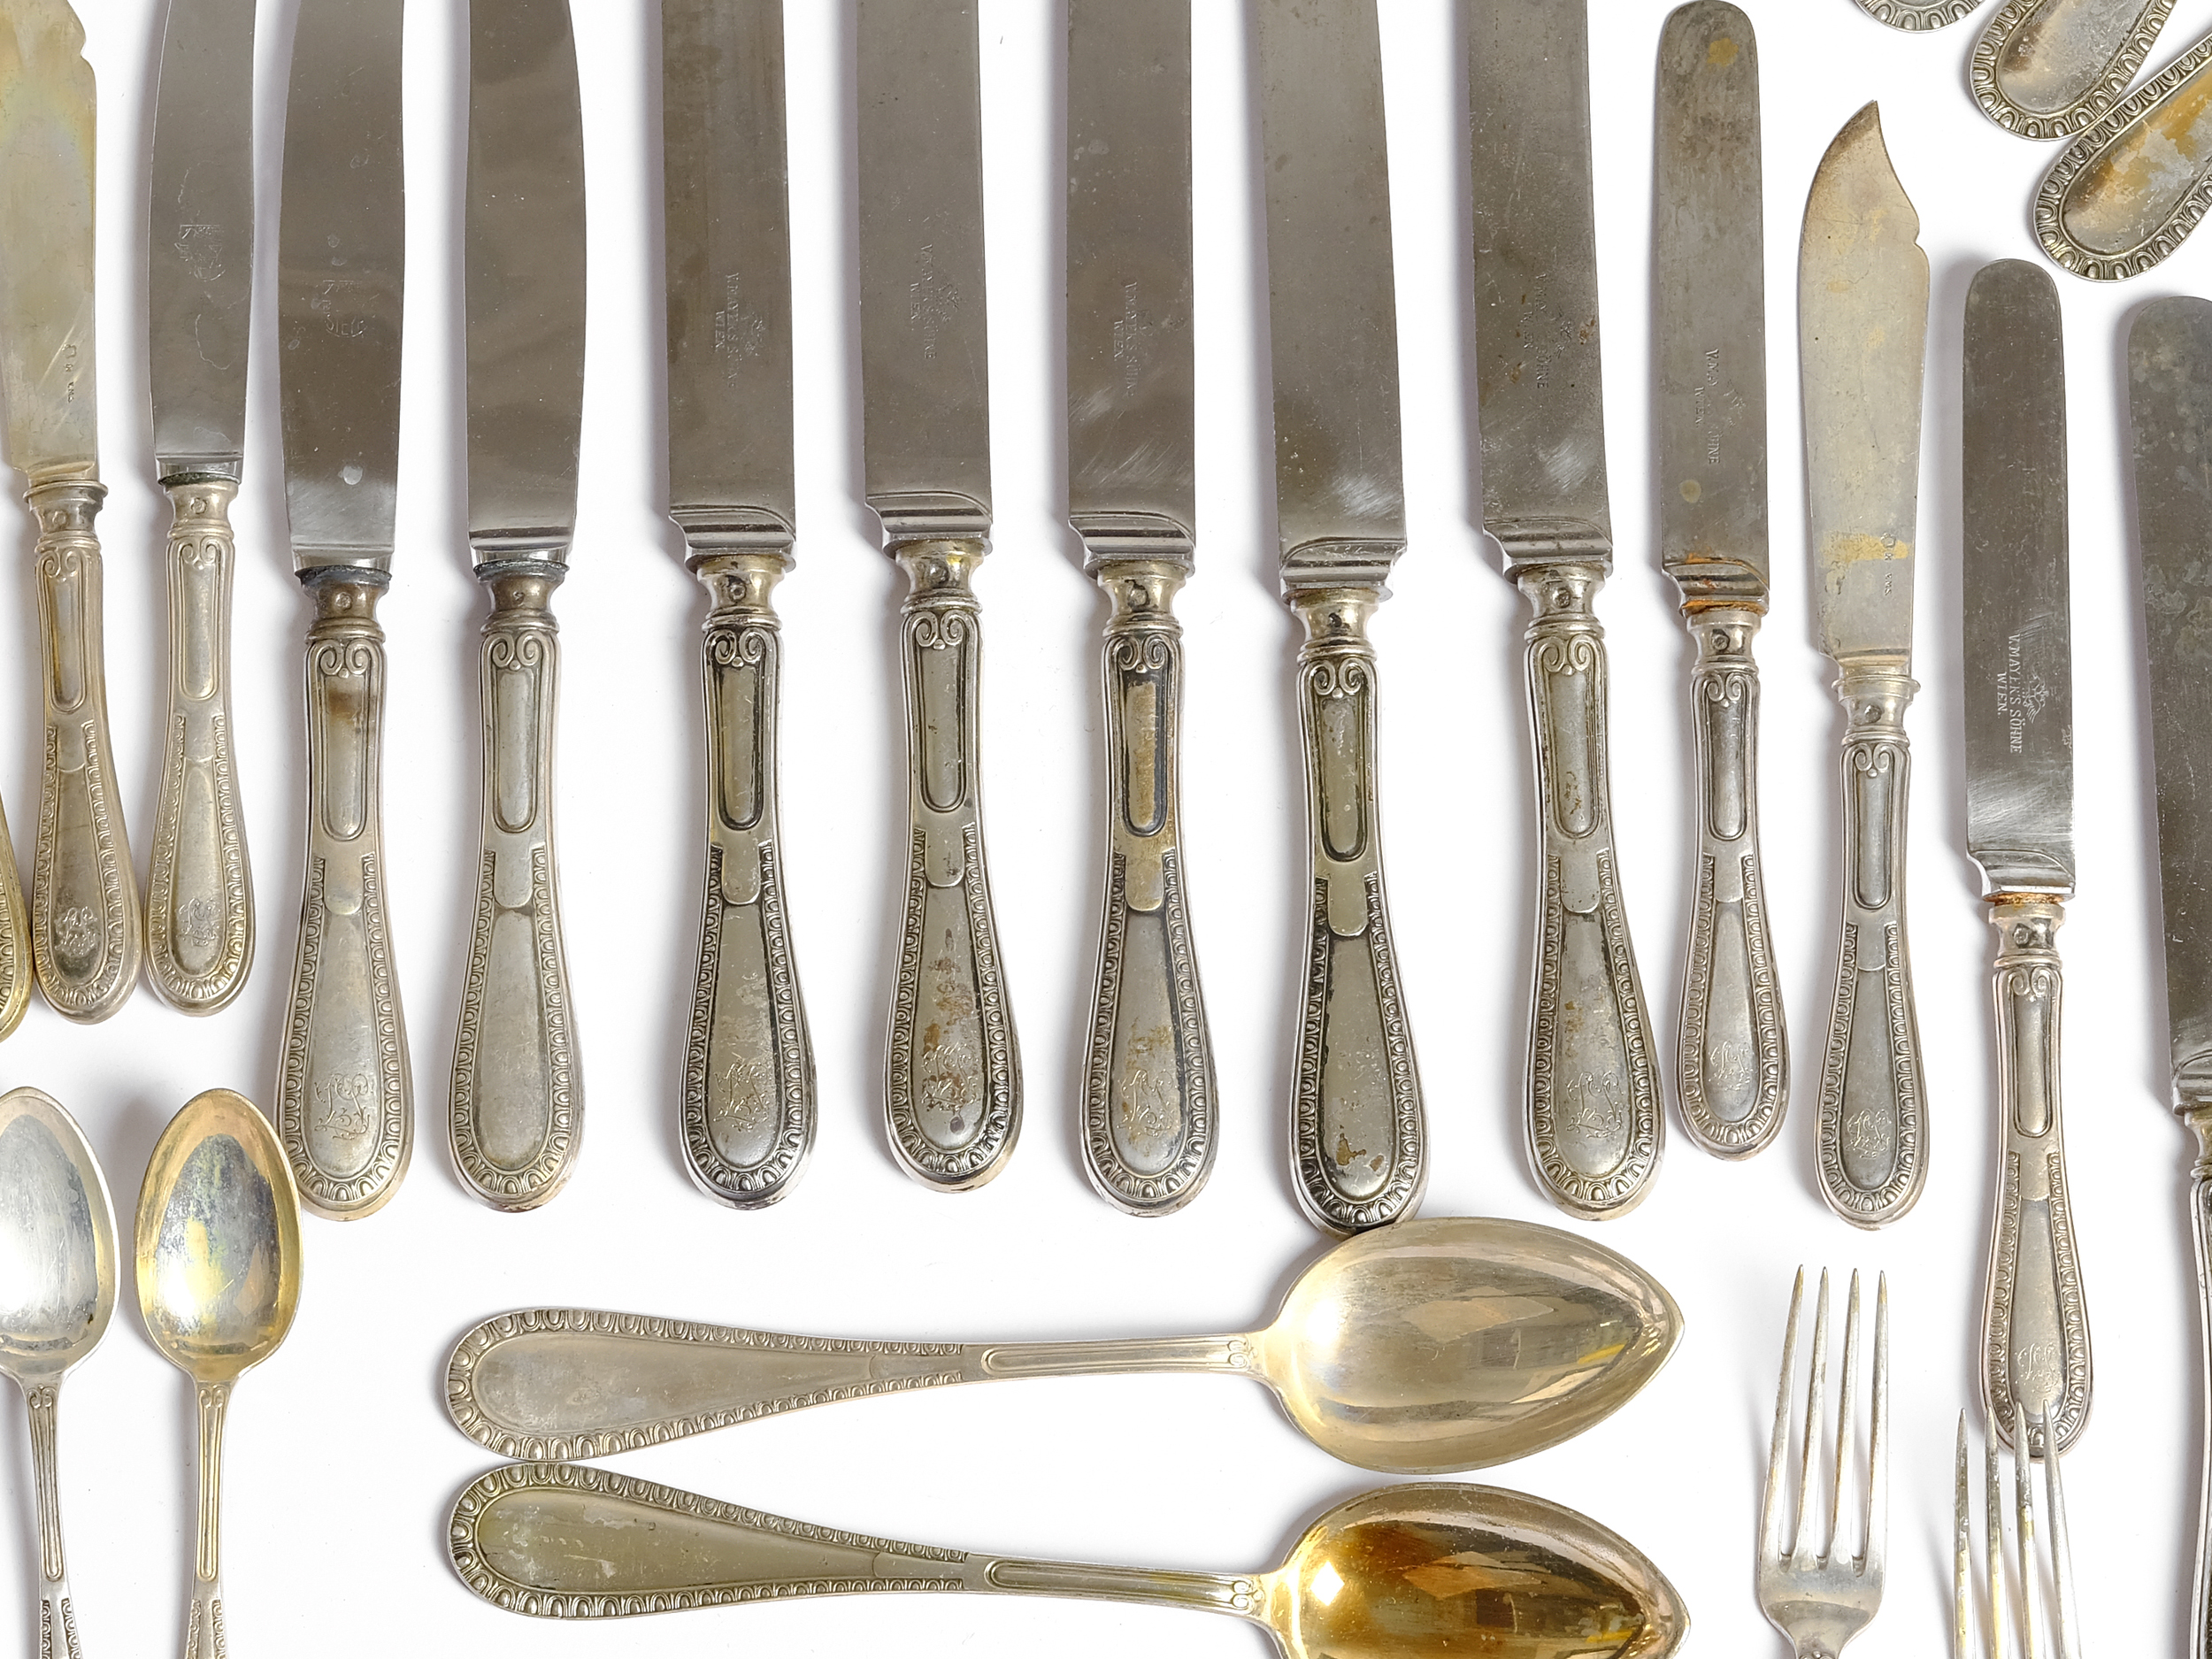 Large cutlery set, 93 pieces - Image 2 of 4